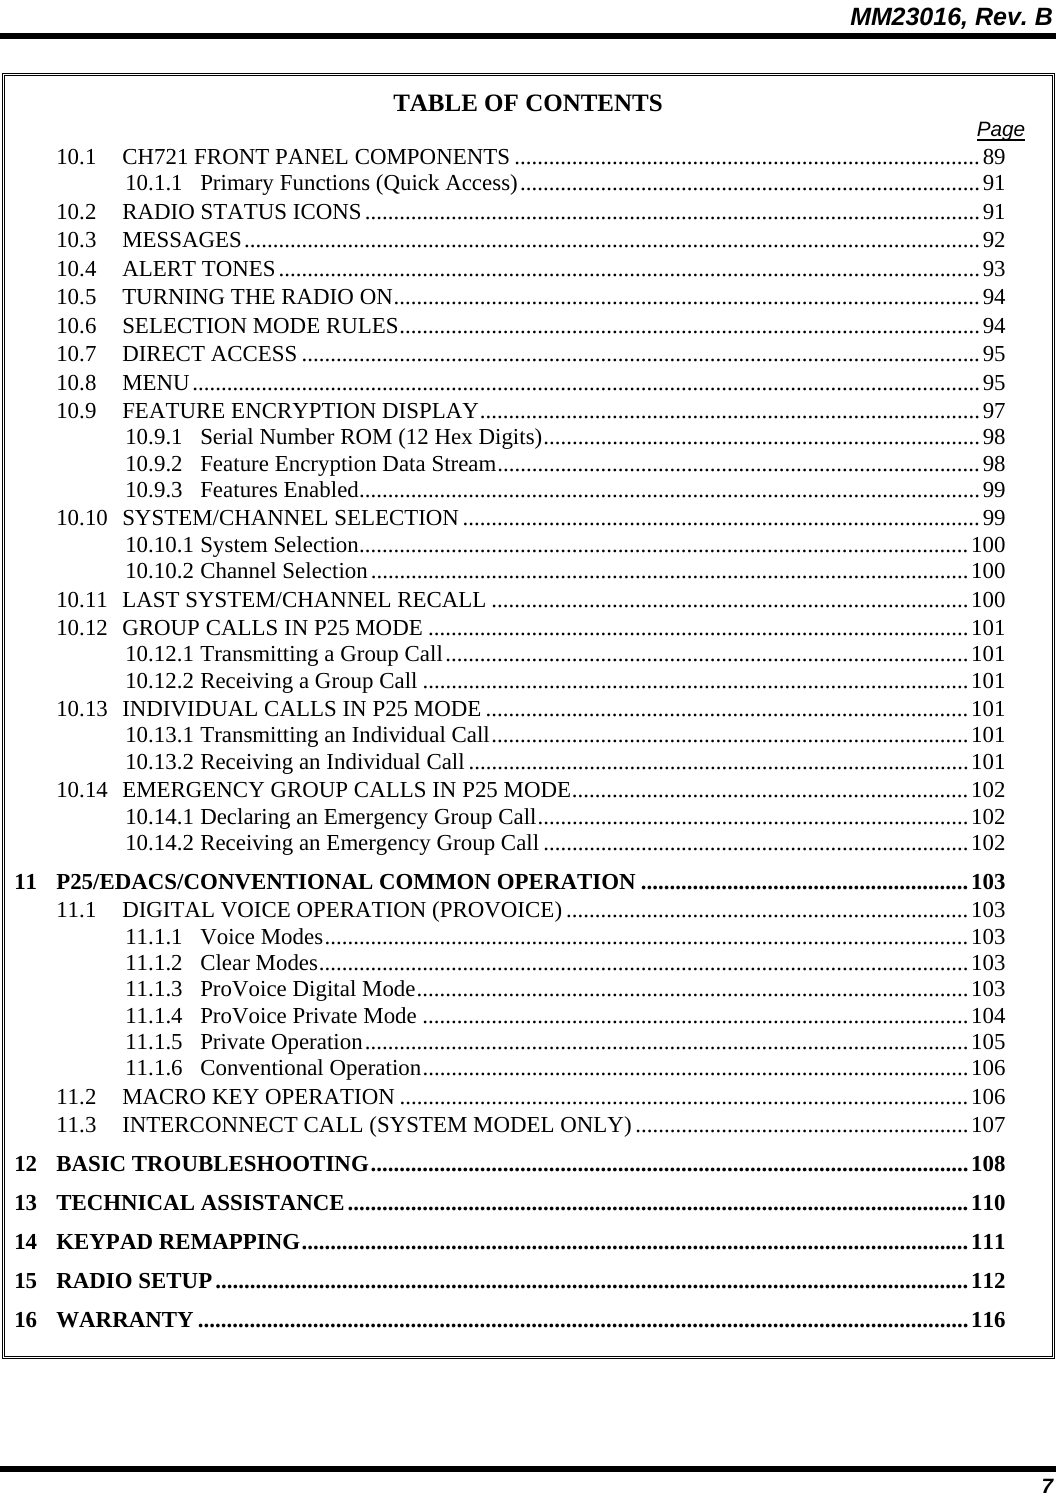 MM23016, Rev. B 7 TABLE OF CONTENTS  Page 10.1 CH721 FRONT PANEL COMPONENTS .................................................................................89 10.1.1 Primary Functions (Quick Access)................................................................................91 10.2 RADIO STATUS ICONS...........................................................................................................91 10.3 MESSAGES................................................................................................................................92 10.4 ALERT TONES..........................................................................................................................93 10.5 TURNING THE RADIO ON......................................................................................................94 10.6 SELECTION MODE RULES.....................................................................................................94 10.7 DIRECT ACCESS ......................................................................................................................95 10.8 MENU.........................................................................................................................................95 10.9 FEATURE ENCRYPTION DISPLAY.......................................................................................97 10.9.1 Serial Number ROM (12 Hex Digits)............................................................................98 10.9.2 Feature Encryption Data Stream....................................................................................98 10.9.3 Features Enabled............................................................................................................99 10.10 SYSTEM/CHANNEL SELECTION..........................................................................................99 10.10.1 System Selection..........................................................................................................100 10.10.2 Channel Selection........................................................................................................100 10.11 LAST SYSTEM/CHANNEL RECALL ...................................................................................100 10.12 GROUP CALLS IN P25 MODE ..............................................................................................101 10.12.1 Transmitting a Group Call...........................................................................................101 10.12.2 Receiving a Group Call ...............................................................................................101 10.13 INDIVIDUAL CALLS IN P25 MODE ....................................................................................101 10.13.1 Transmitting an Individual Call...................................................................................101 10.13.2 Receiving an Individual Call .......................................................................................101 10.14 EMERGENCY GROUP CALLS IN P25 MODE.....................................................................102 10.14.1 Declaring an Emergency Group Call...........................................................................102 10.14.2 Receiving an Emergency Group Call ..........................................................................102 11 P25/EDACS/CONVENTIONAL COMMON OPERATION .........................................................103 11.1 DIGITAL VOICE OPERATION (PROVOICE) ......................................................................103 11.1.1 Voice Modes................................................................................................................103 11.1.2 Clear Modes.................................................................................................................103 11.1.3 ProVoice Digital Mode................................................................................................103 11.1.4 ProVoice Private Mode ...............................................................................................104 11.1.5 Private Operation.........................................................................................................105 11.1.6 Conventional Operation...............................................................................................106 11.2 MACRO KEY OPERATION ...................................................................................................106 11.3 INTERCONNECT CALL (SYSTEM MODEL ONLY)..........................................................107 12 BASIC TROUBLESHOOTING........................................................................................................108 13 TECHNICAL ASSISTANCE............................................................................................................110 14 KEYPAD REMAPPING....................................................................................................................111 15 RADIO SETUP...................................................................................................................................112 16 WARRANTY ......................................................................................................................................116  